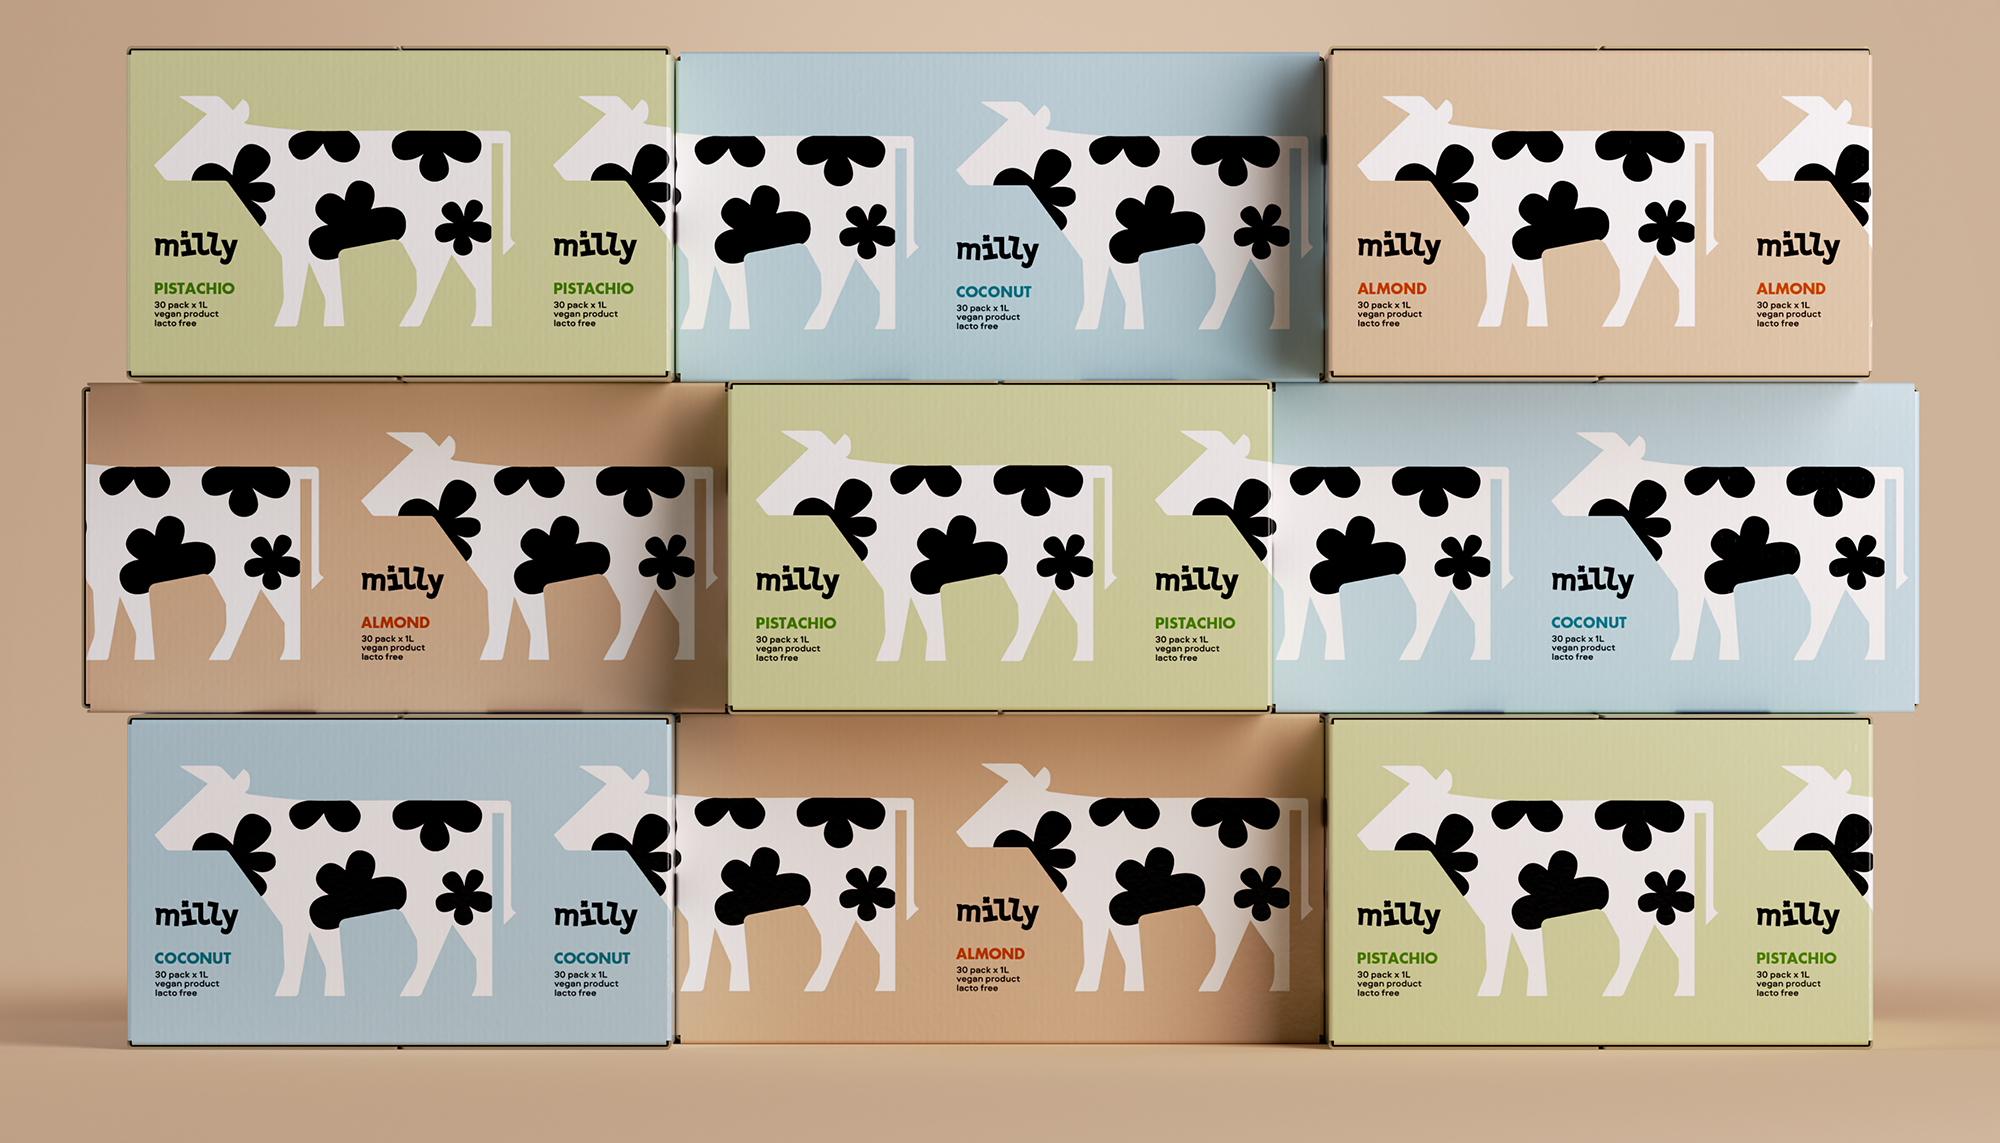 Milly’s Colorful Branding and Packaging Design for Plant-Based Milk